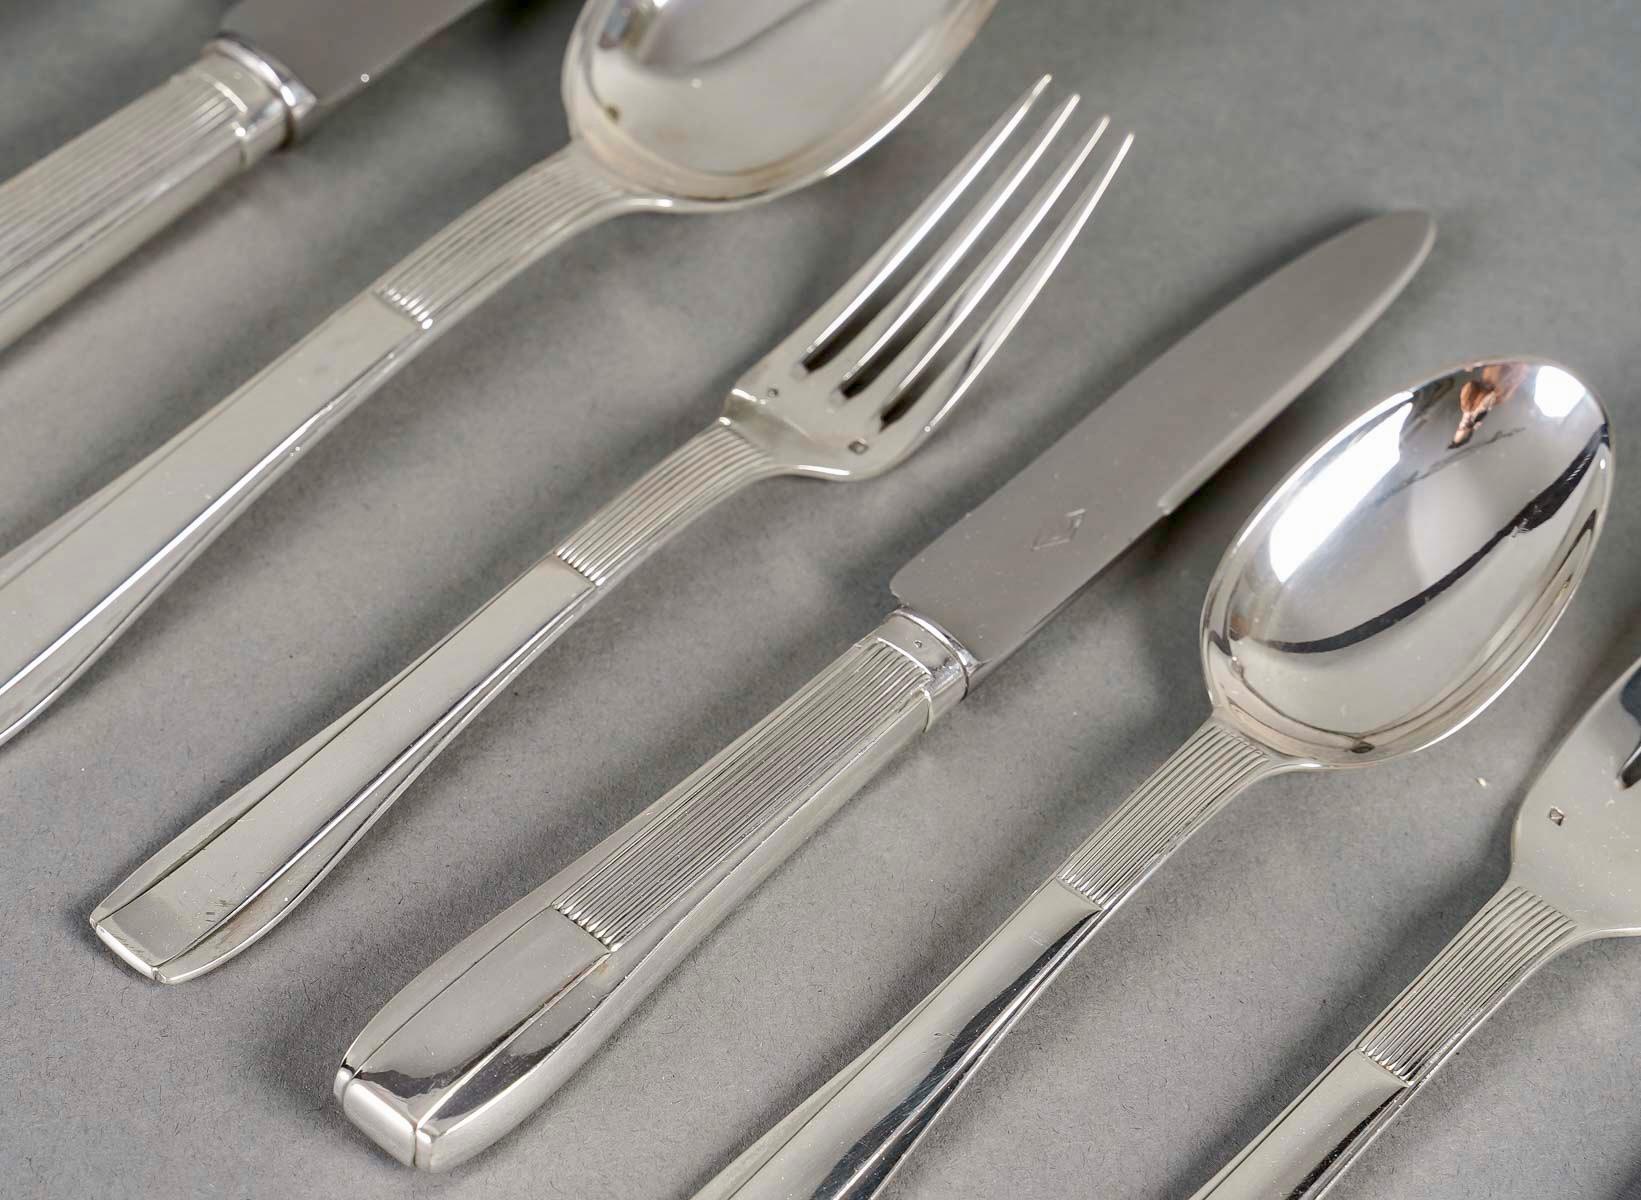 Early 20th Century Puiforcat - Art Deco Cutlery Flatware Set Nice Sterling Silver - 192 Pieces For Sale